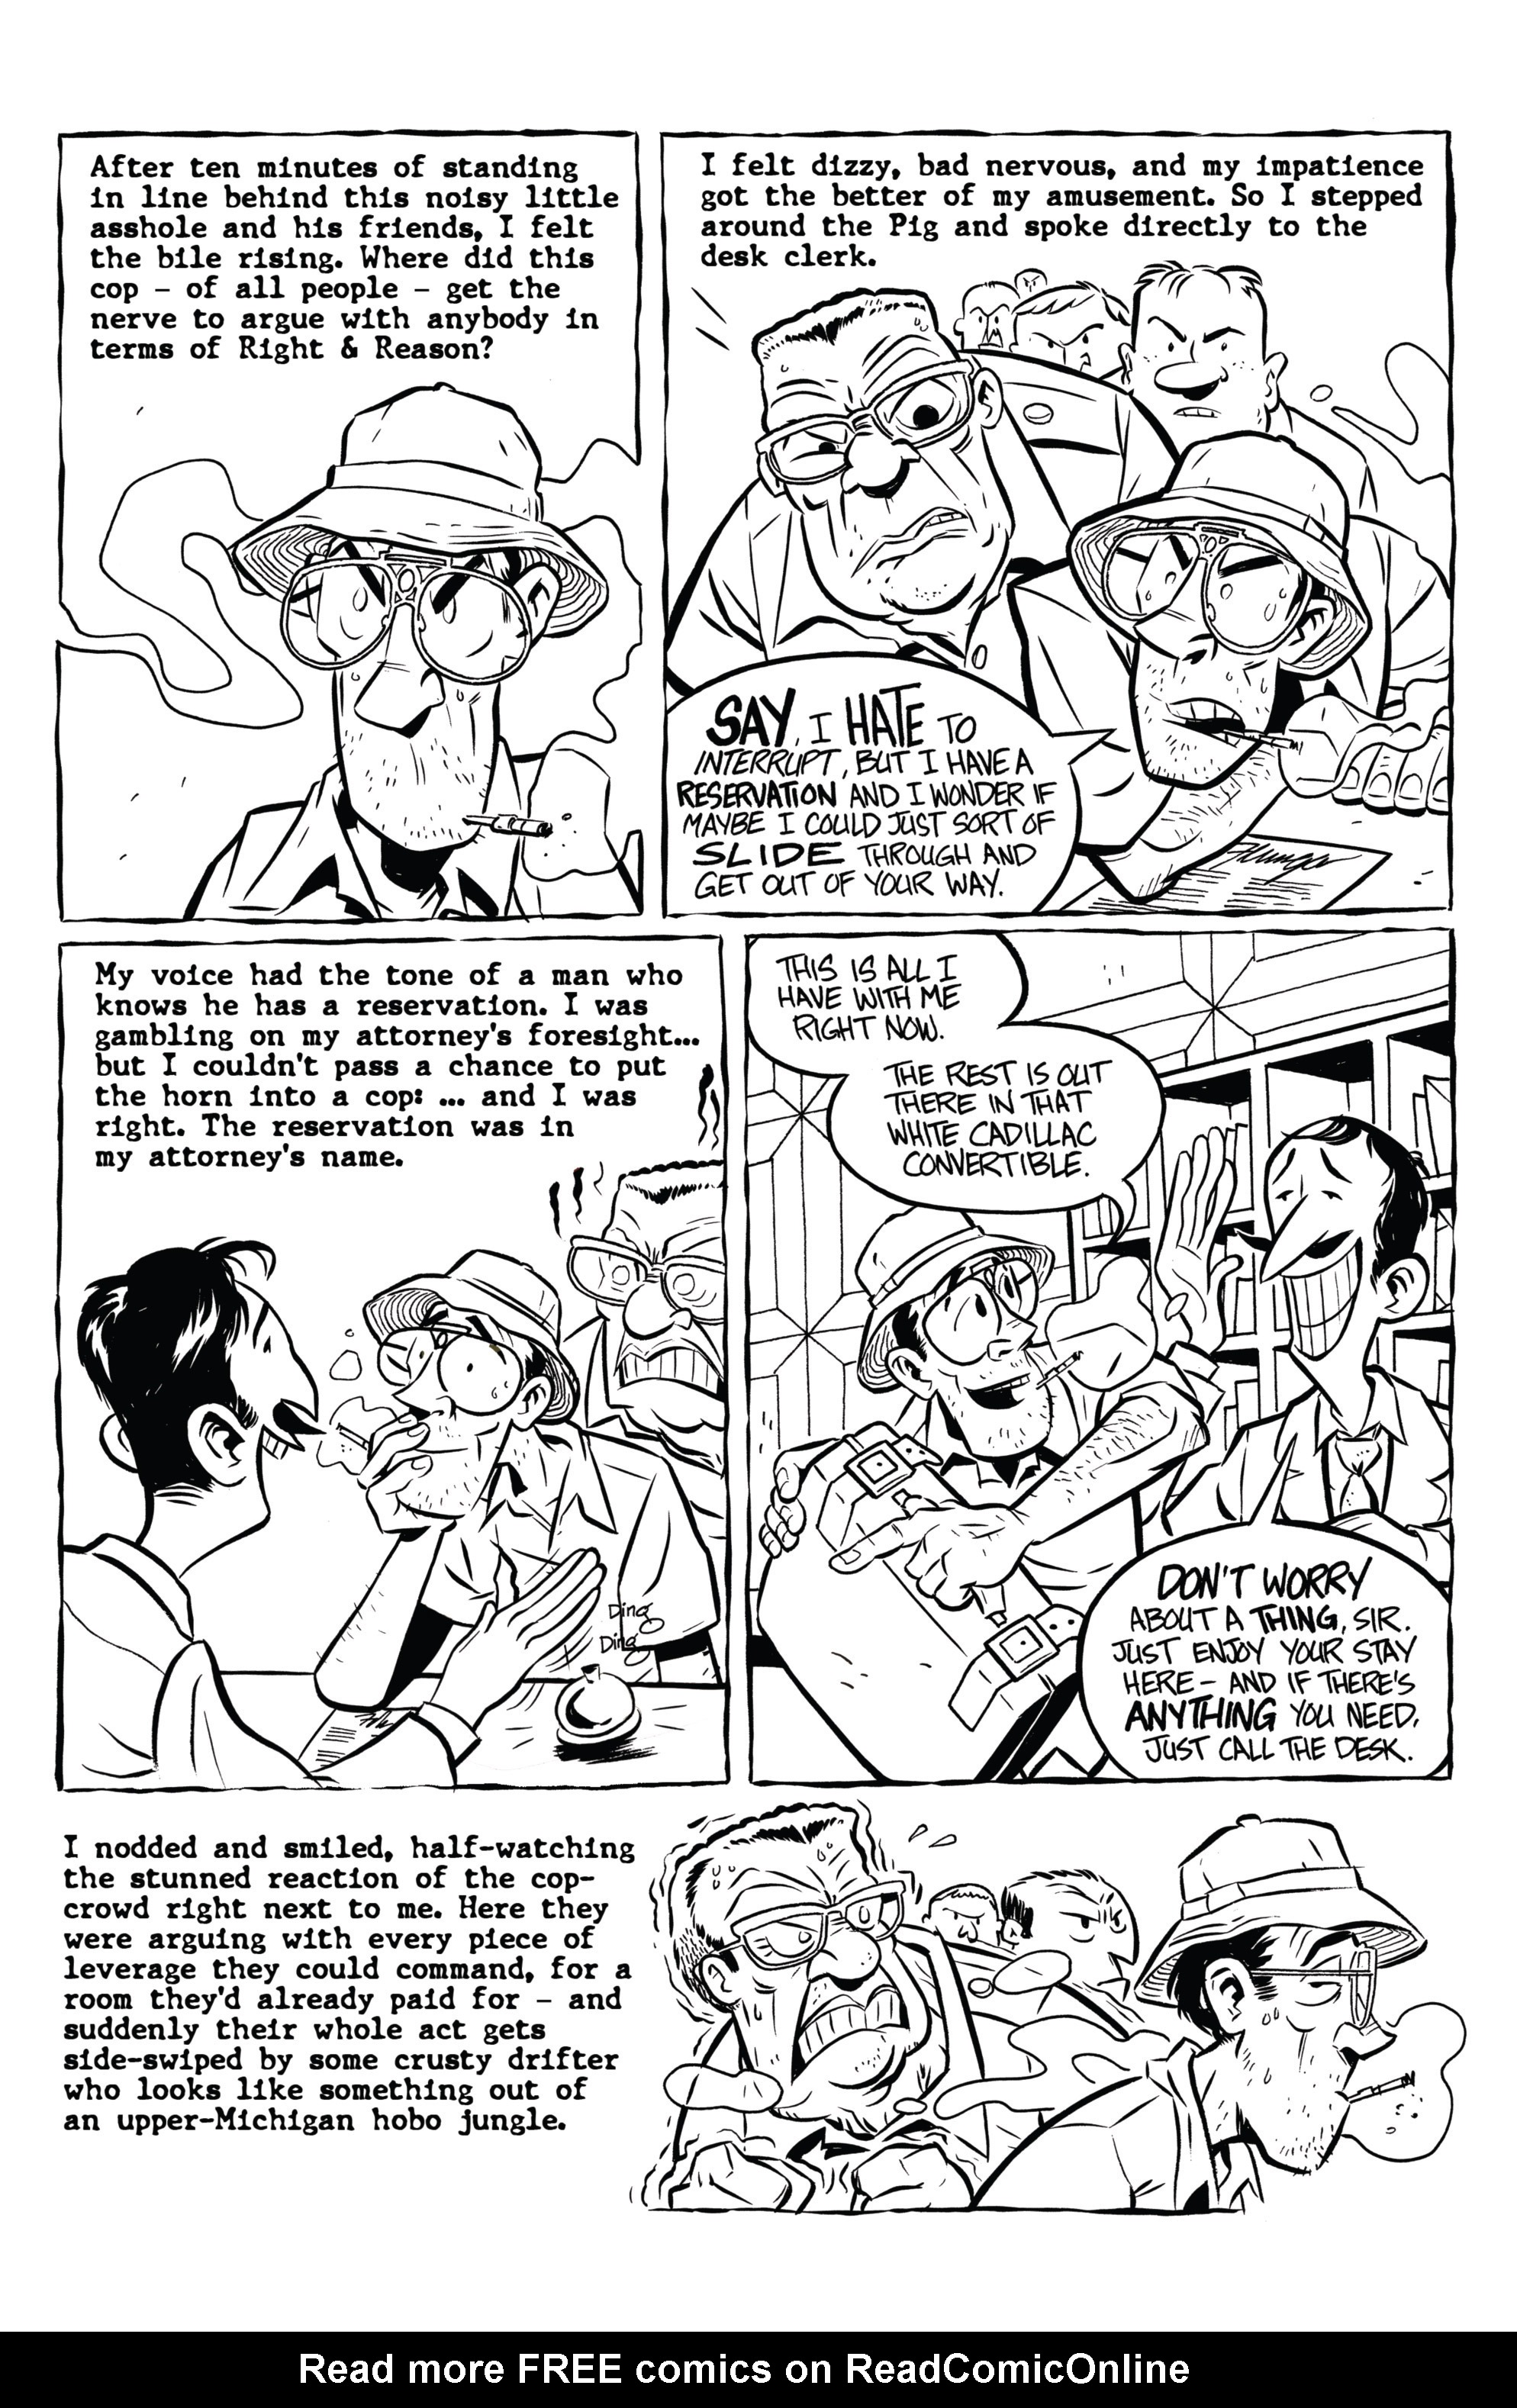 Read online Hunter S. Thompson's Fear and Loathing in Las Vegas comic -  Issue #3 - 18